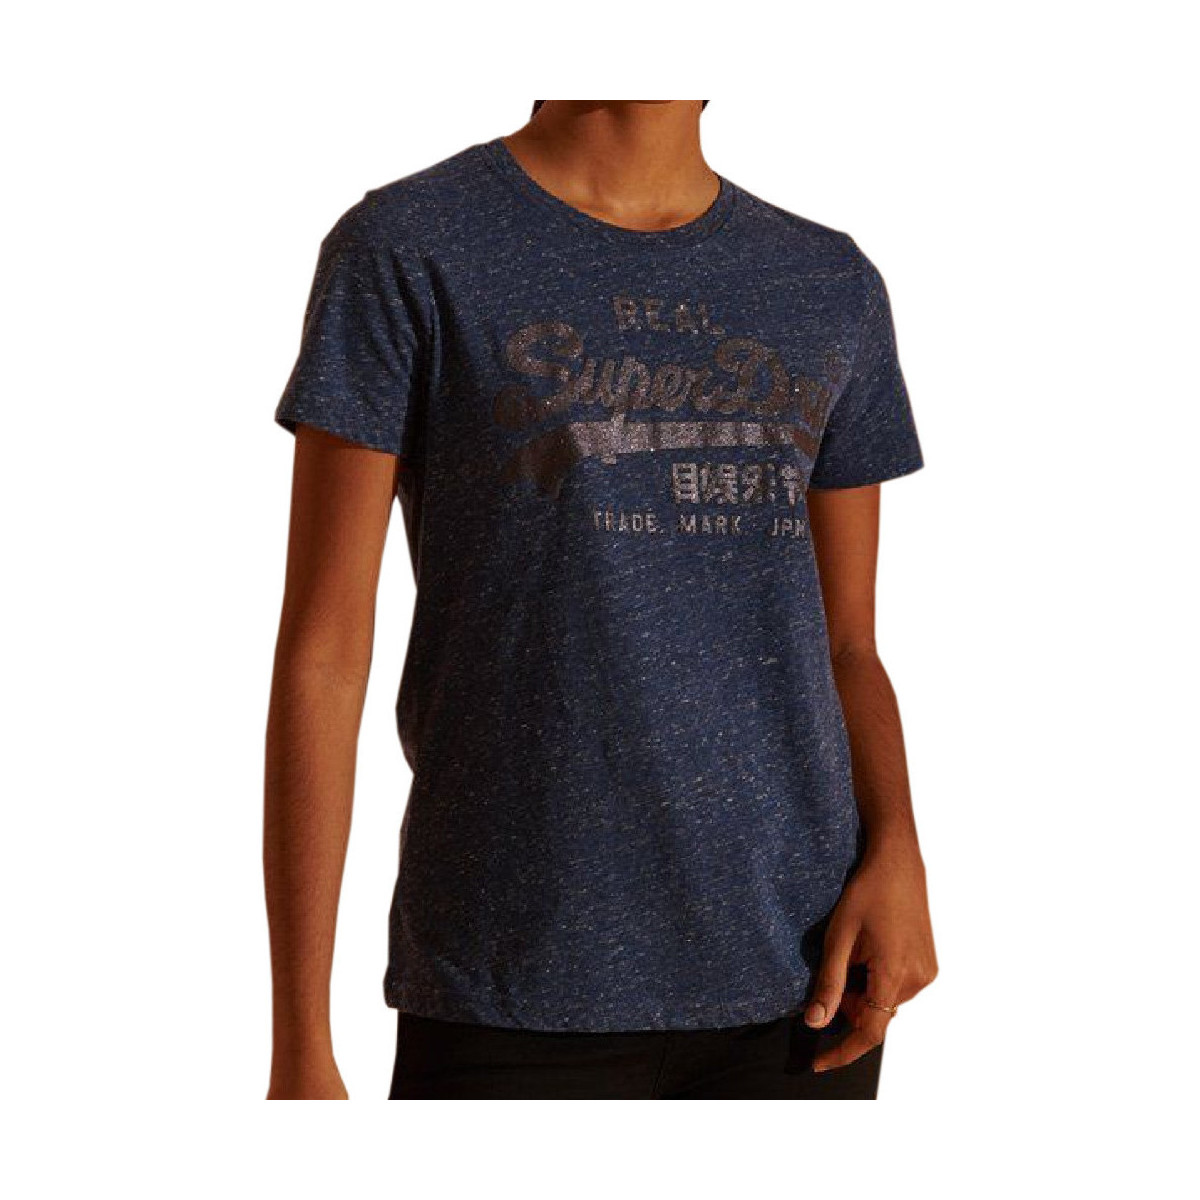 Textiel Dames T-shirts & Polo’s Superdry  Blauw